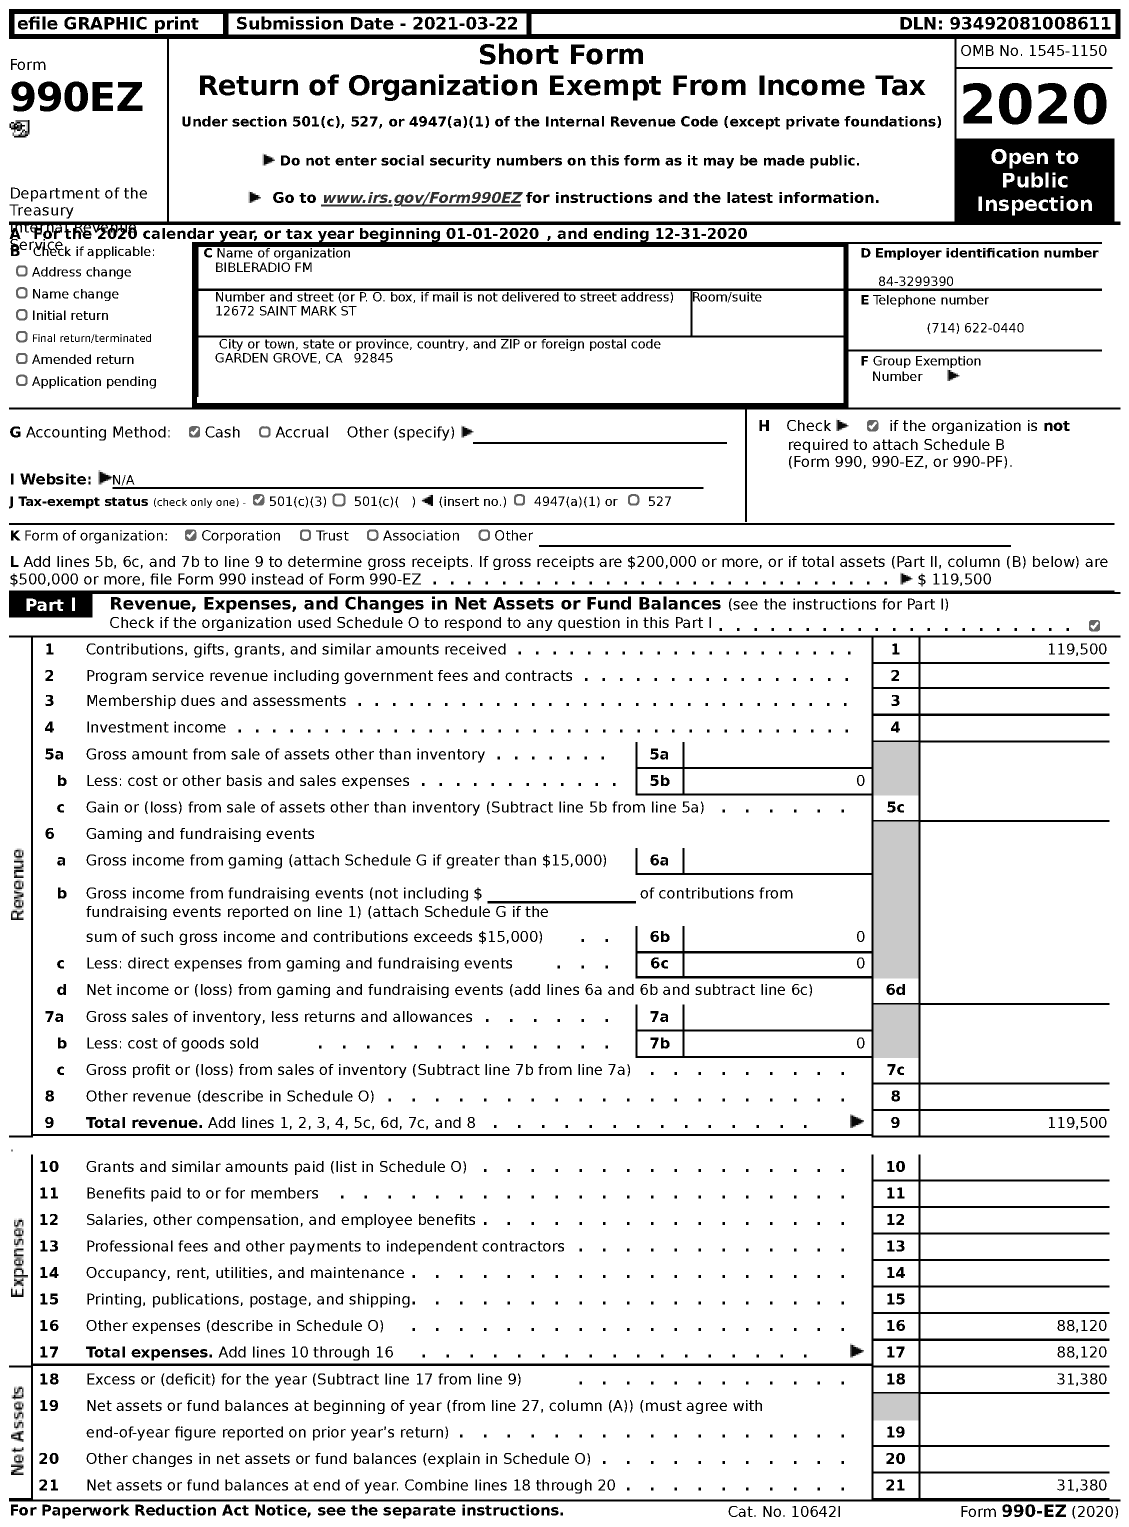 Image of first page of 2020 Form 990EZ for Bibleradio FM